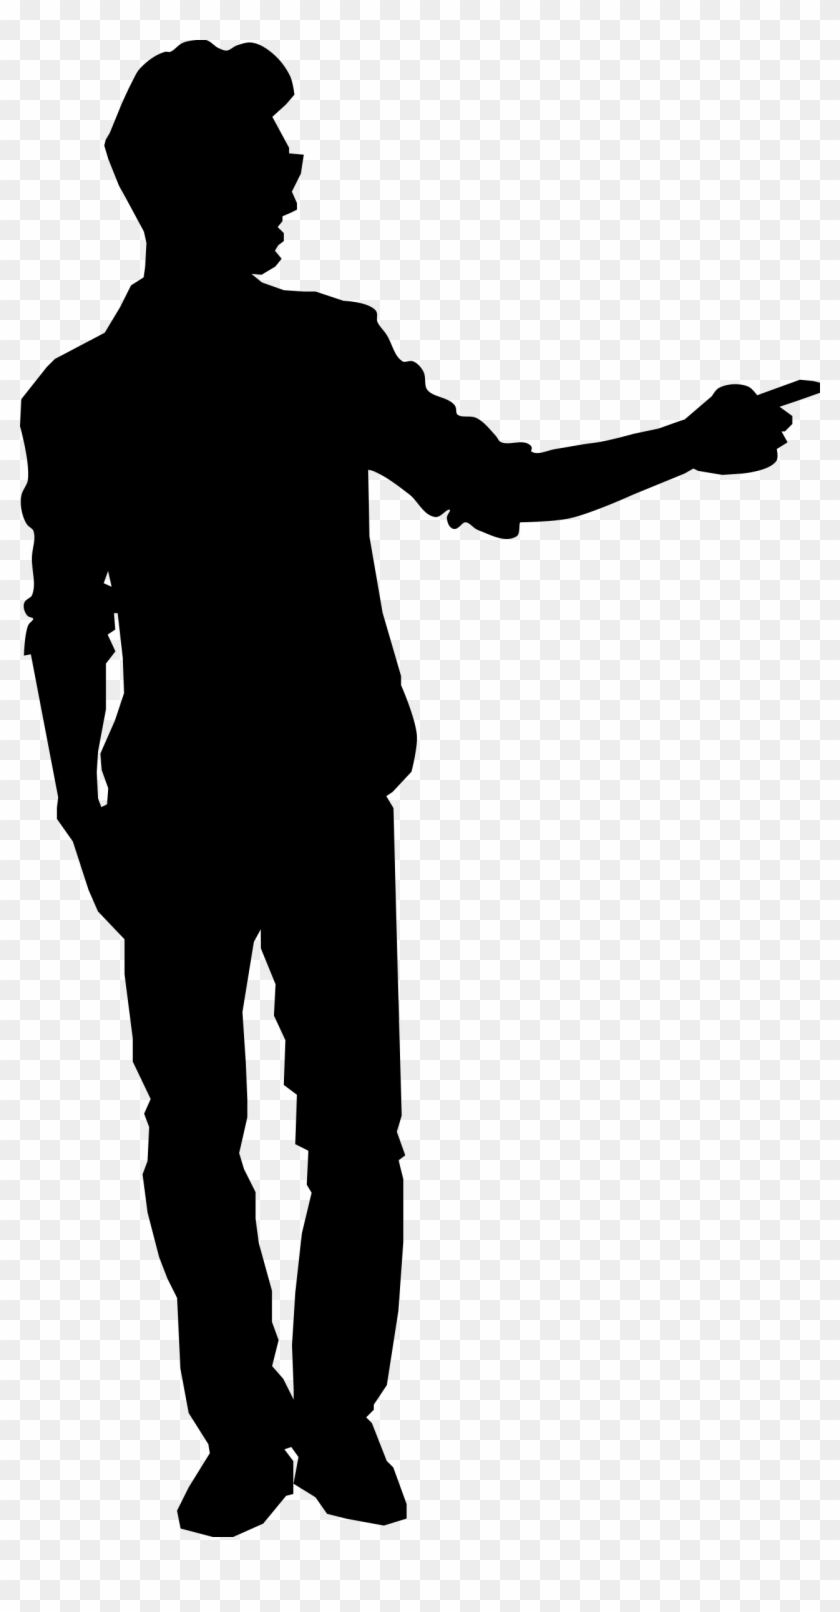 People Silhouette Clipart Transparent - Silhouette Pointing Png #563634